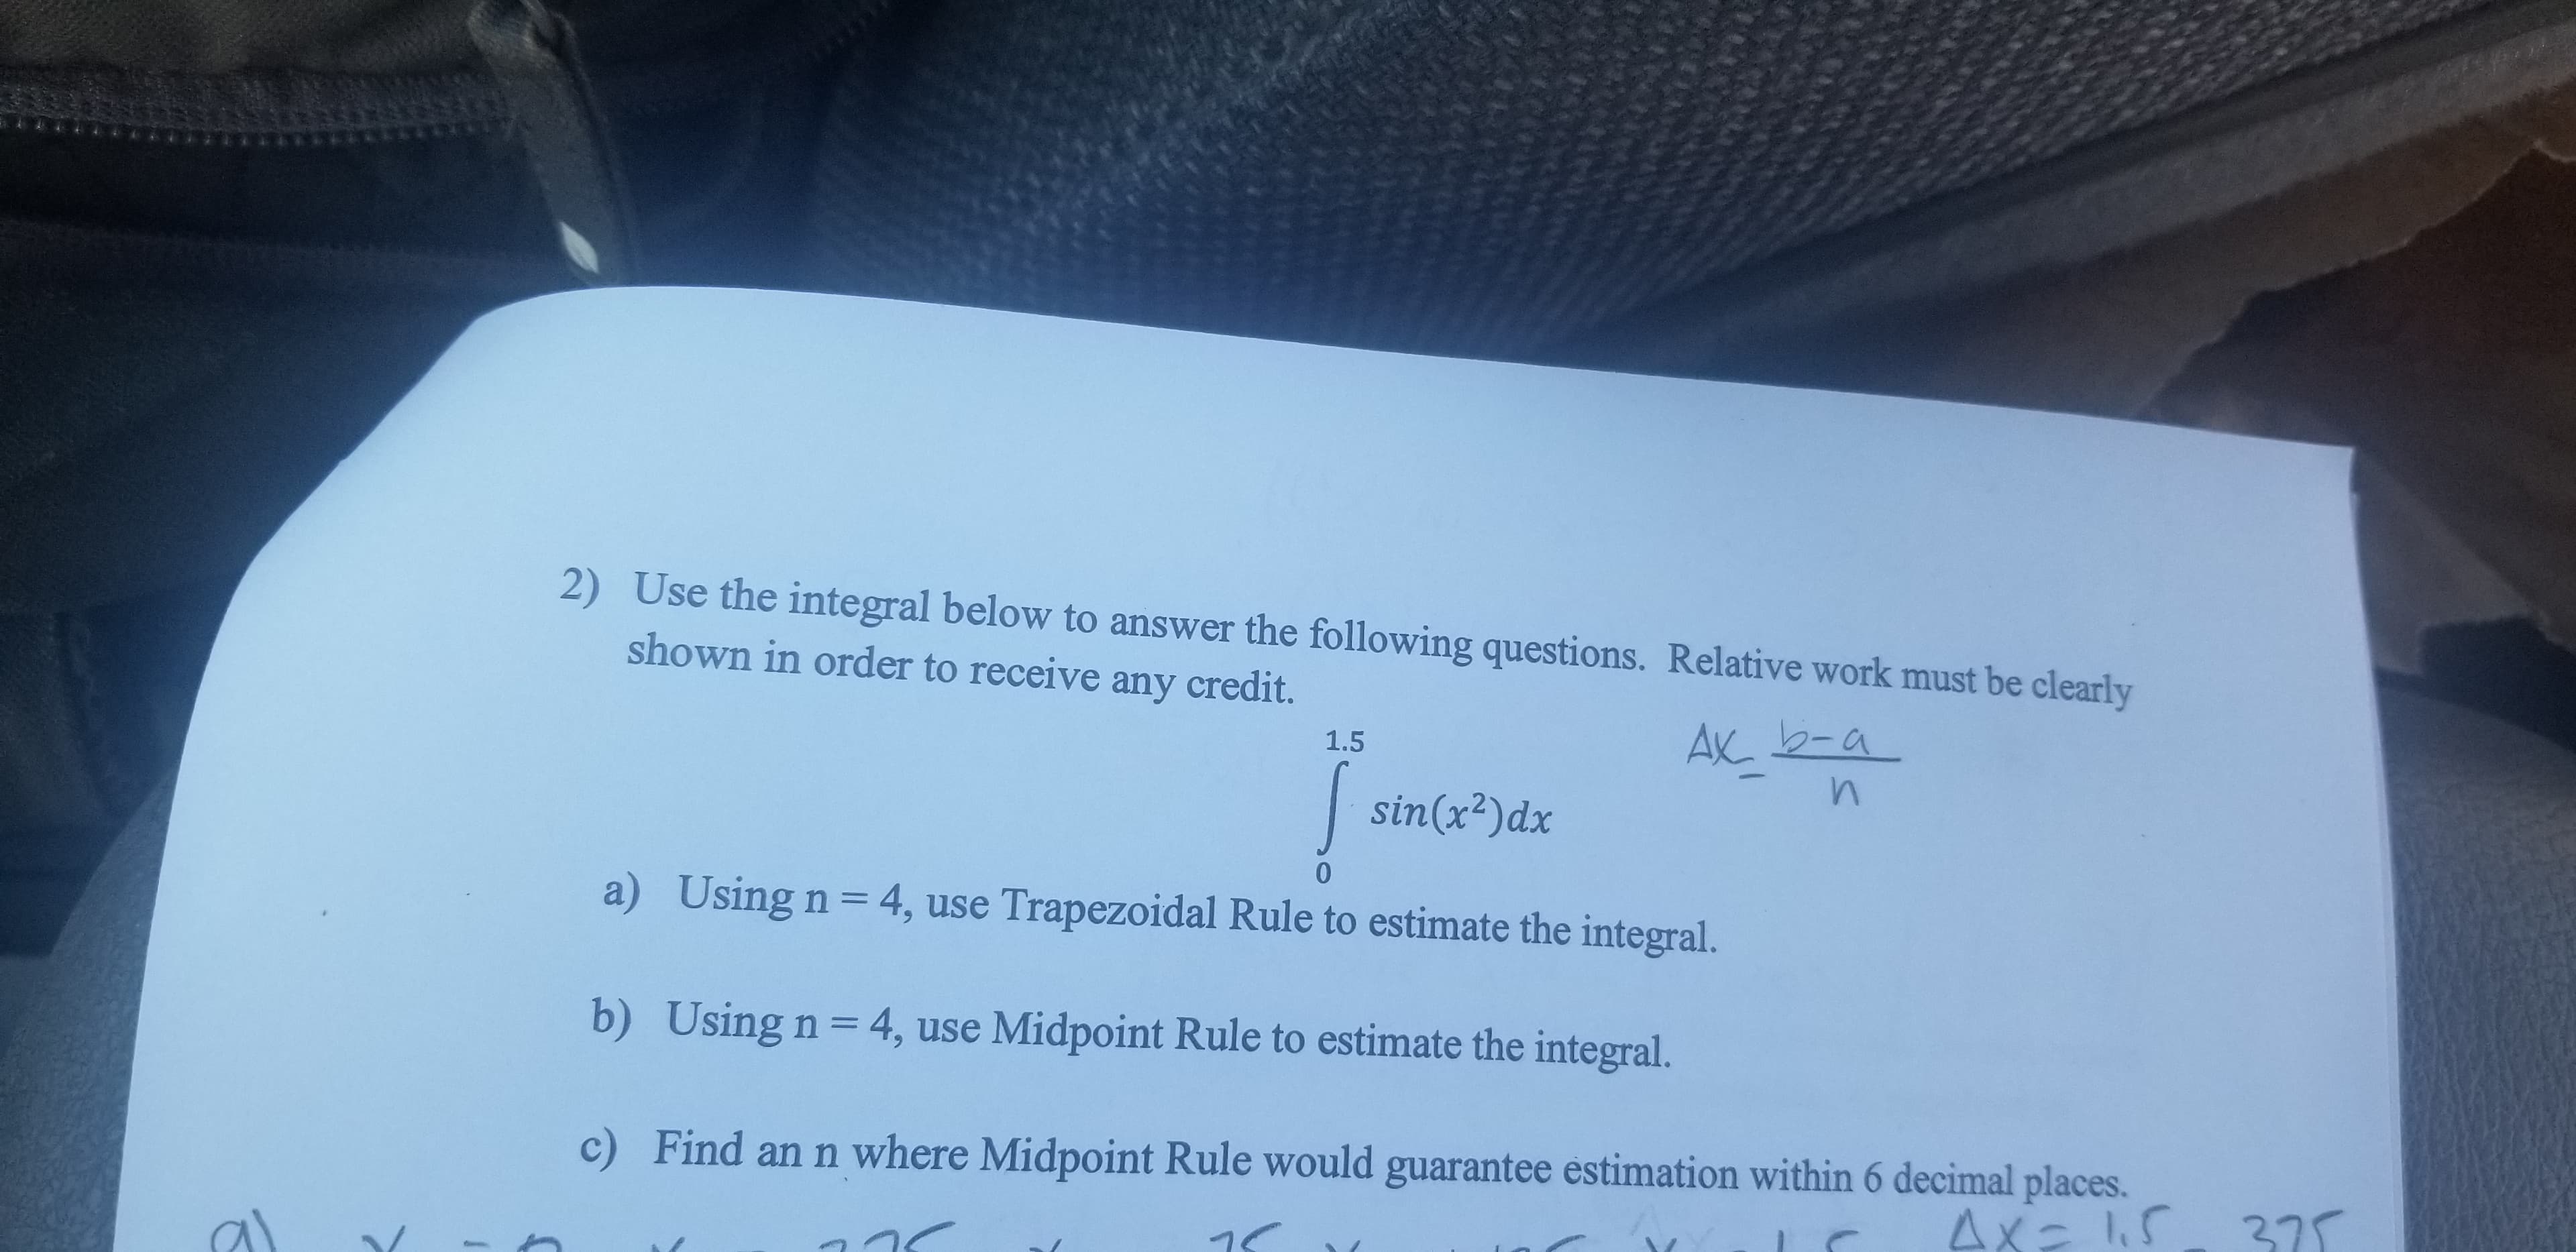 2) Use the integral below to answer the following questions. Relative work must be clearly
shown in order to receive any credit.
AX 2-a
1.5
sin(x2)dx
a)
Using n = 4, use Trapezoidal Rule to estimate the integral.
b) Using n 4, use Midpoint Rule to estimate the integral.
Find an n where Midpoint Rule would guarantee estimation within 6 decimal places.
c)
4x- 15 27
